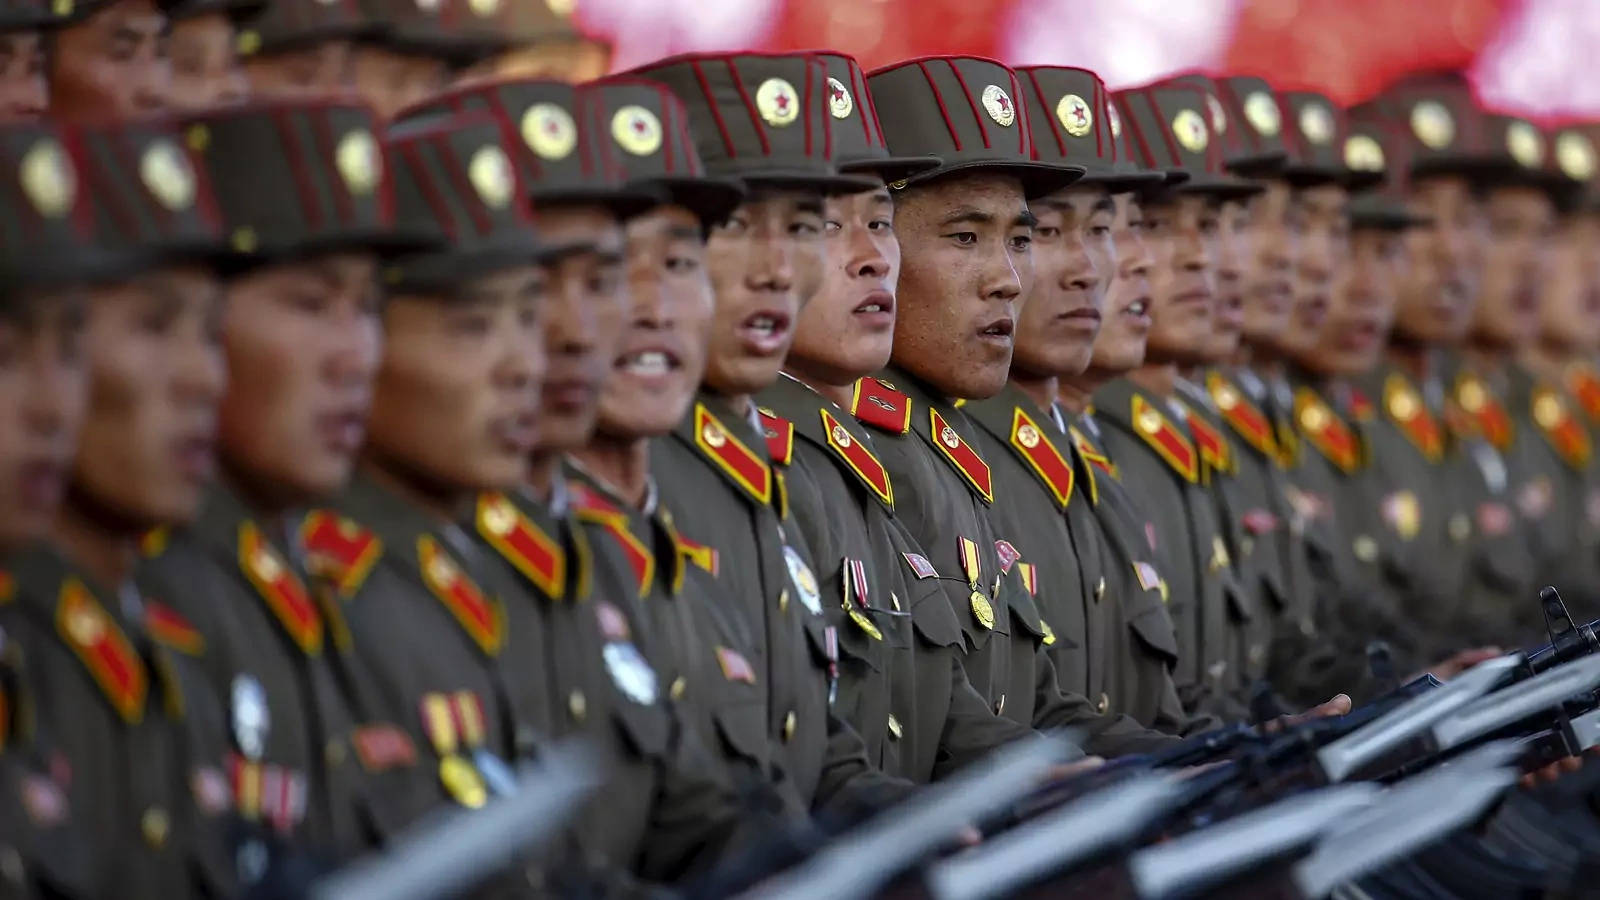 North Korea Soldiers Lined-up Wallpaper